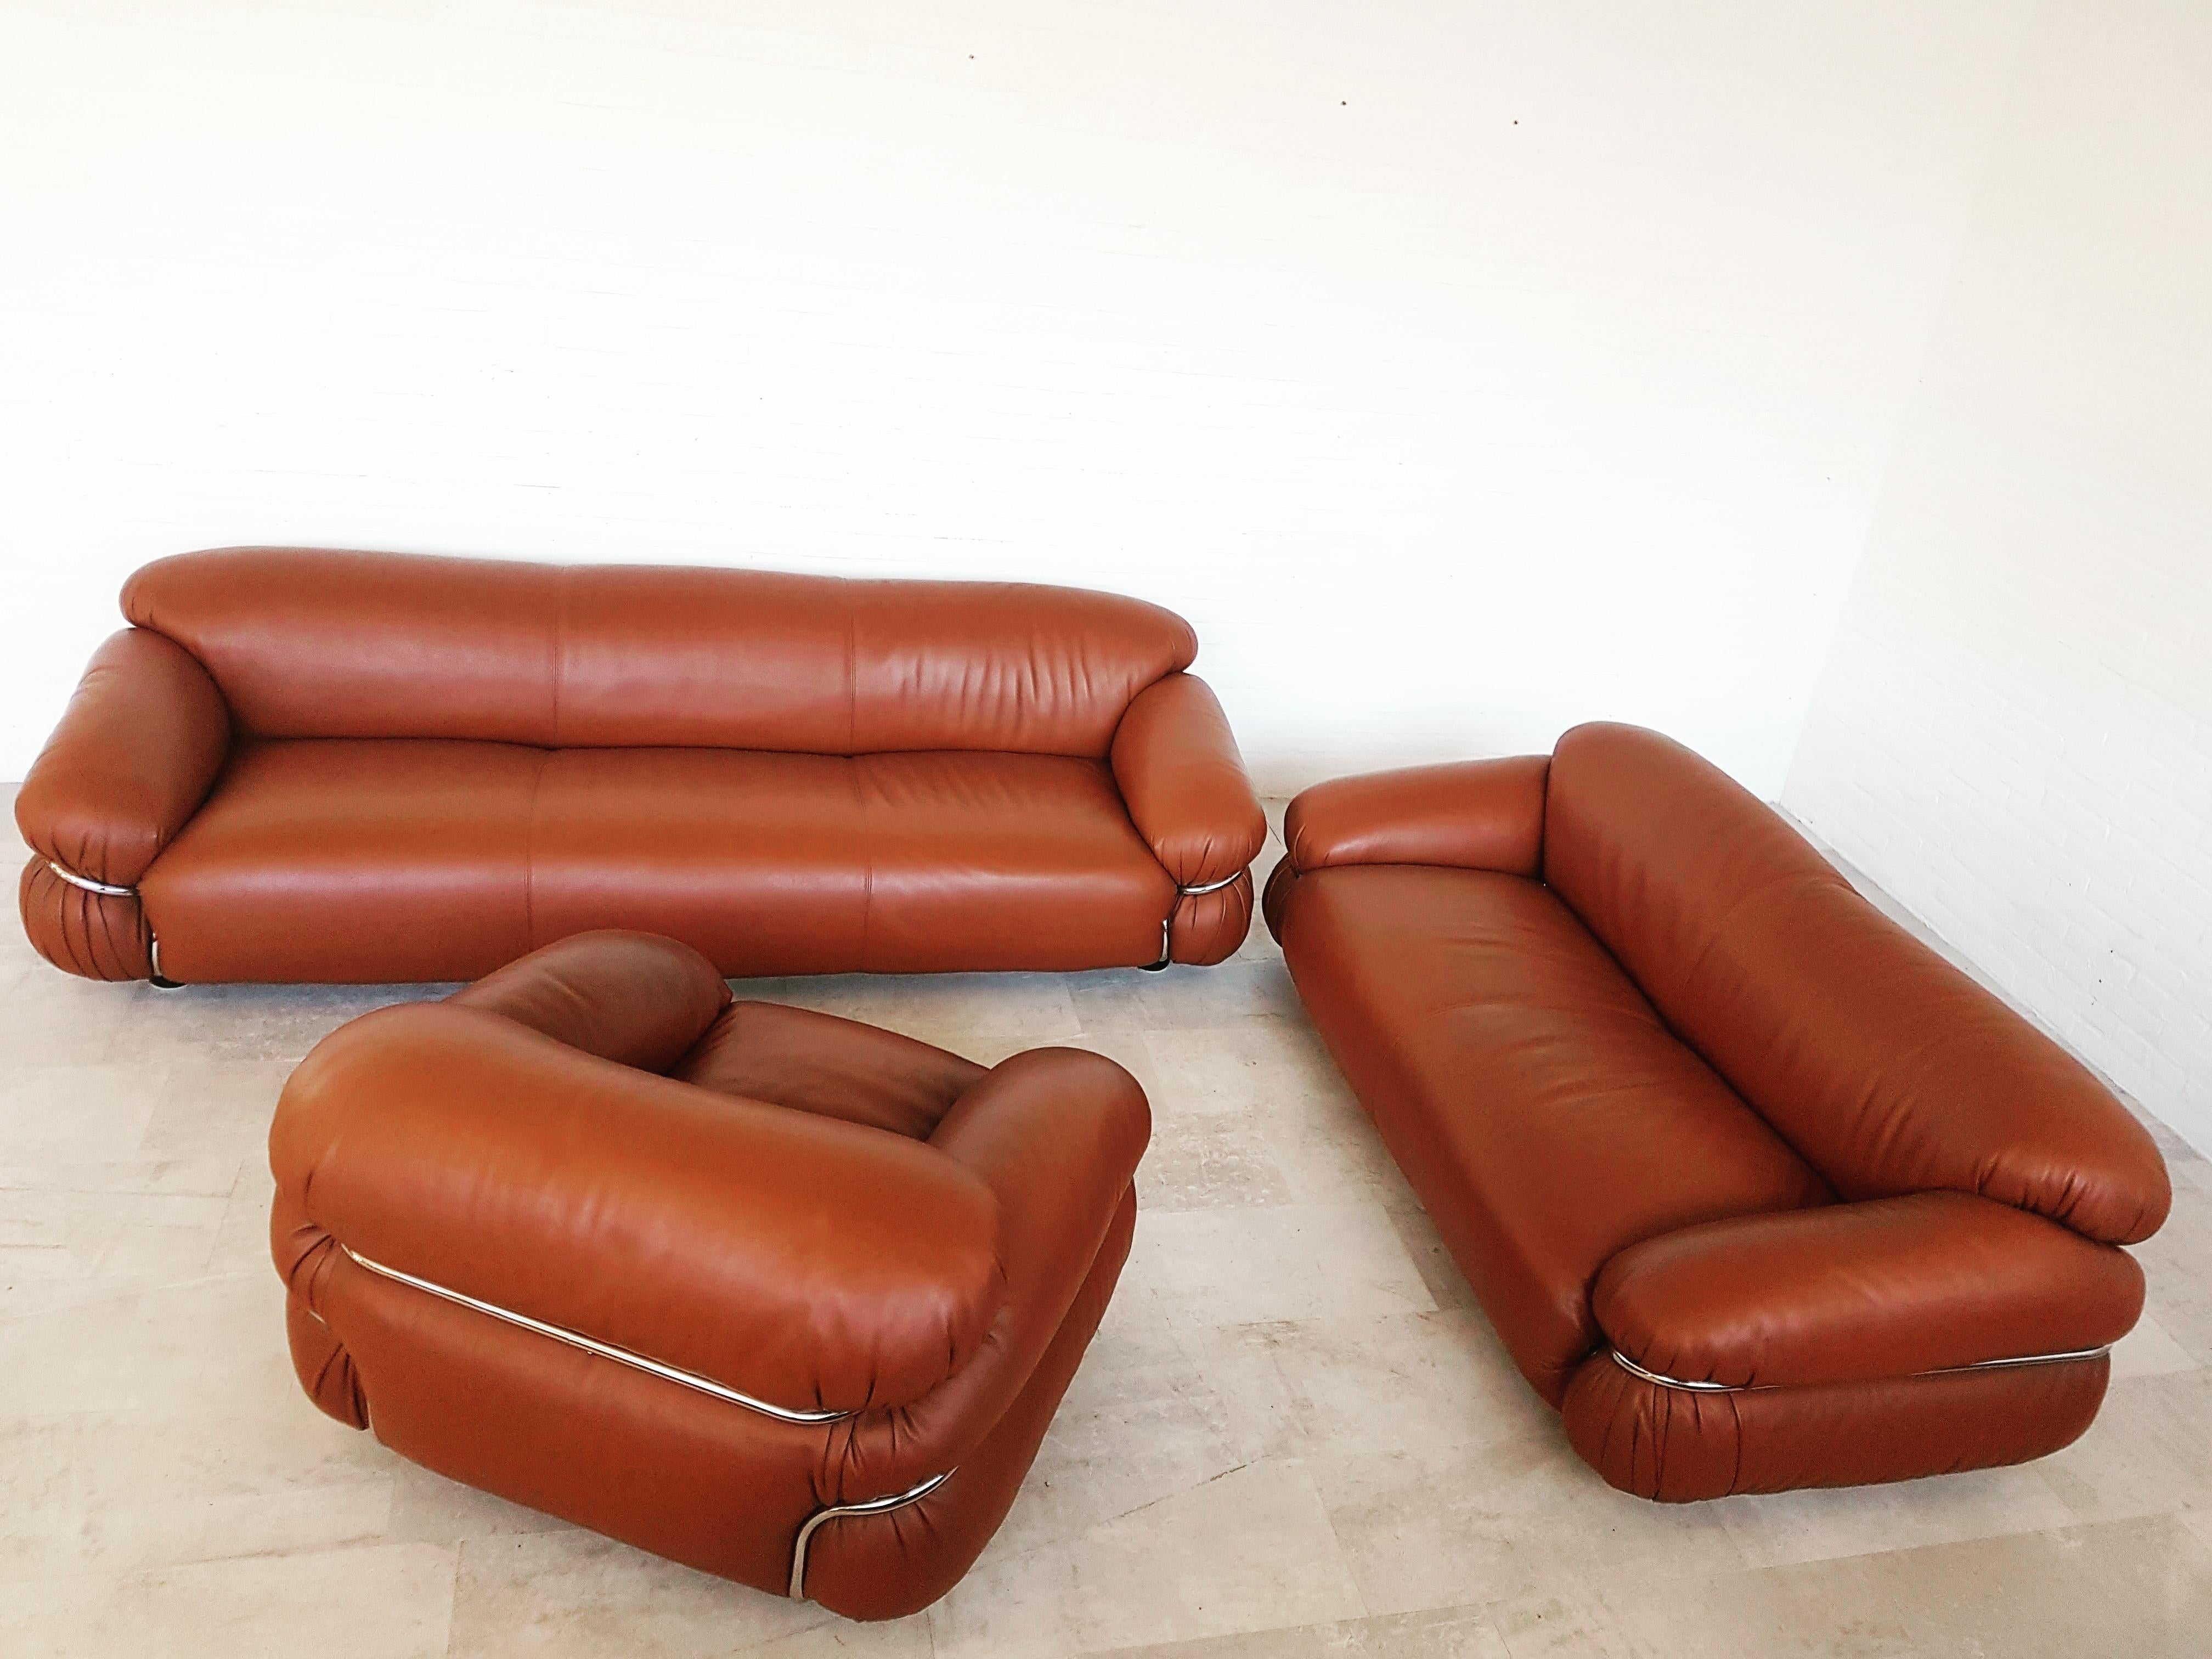 Cassina 'Sesann' Two-Seat in Cognac Leather and Chrome 1